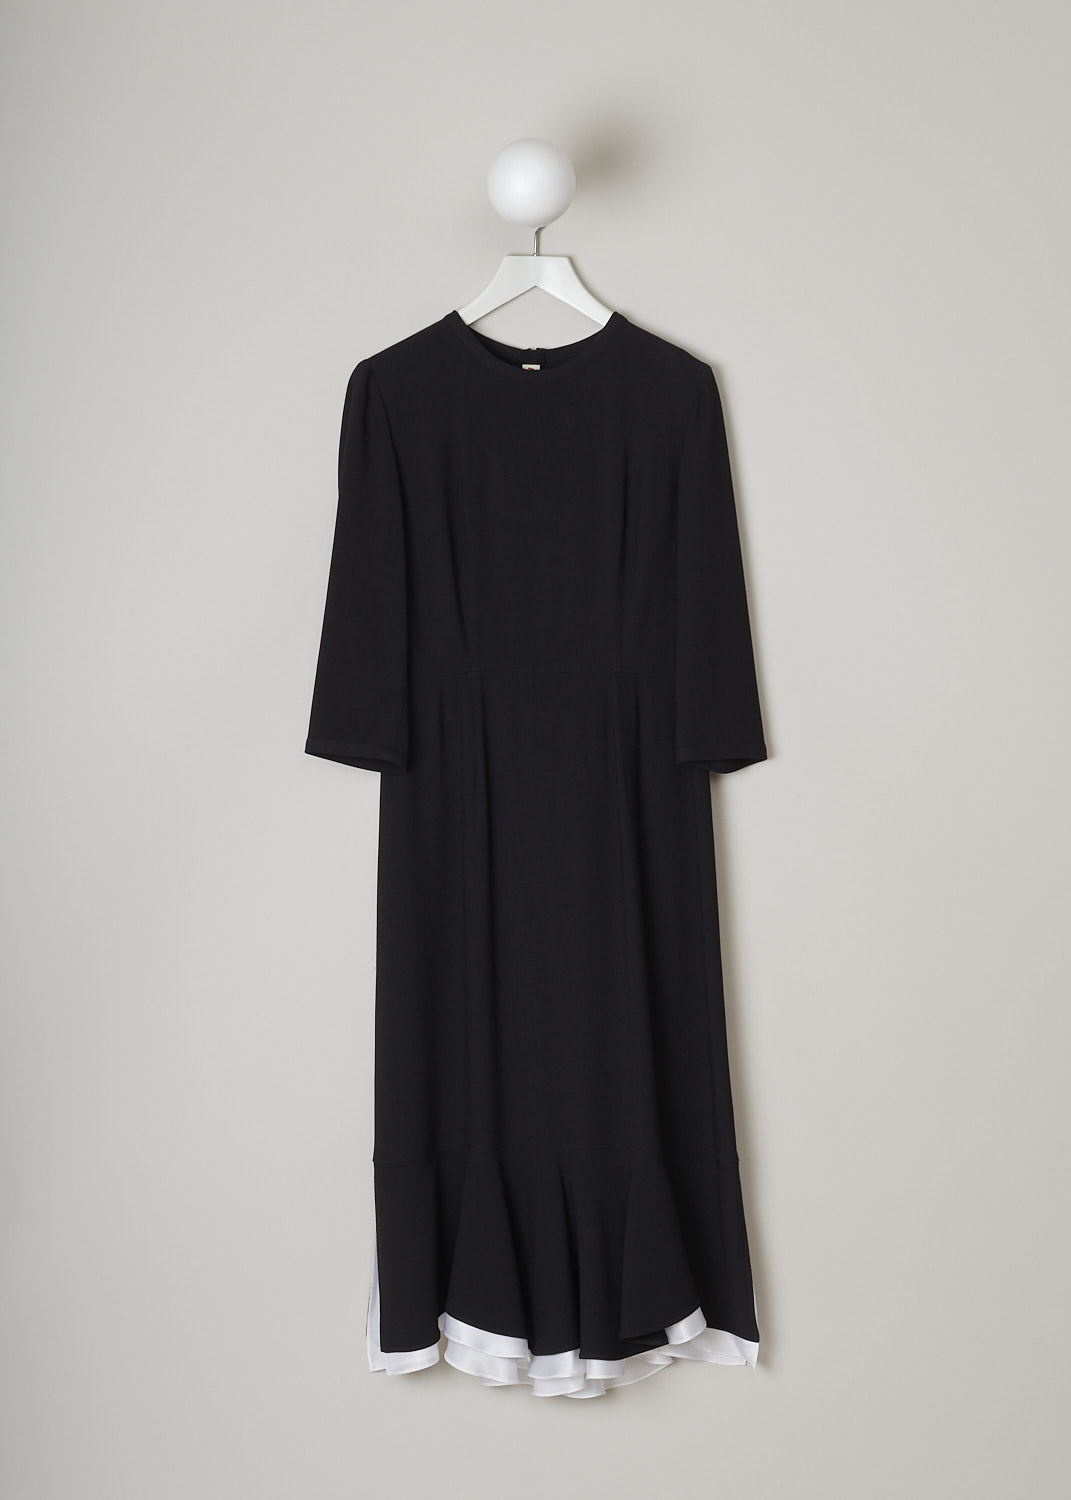 MARNI, BLACK MIDI DRESS WITH WHITE TRIM, ABMA0765Q0_UTV851_00N99, Black, White, Front, This black midi dress has a round neckline an three quarter sleeves. The dress has a fitted bodice with a slightly flared skirt. The hemline has a subtle flounce with a white satin trim peeking out.    
